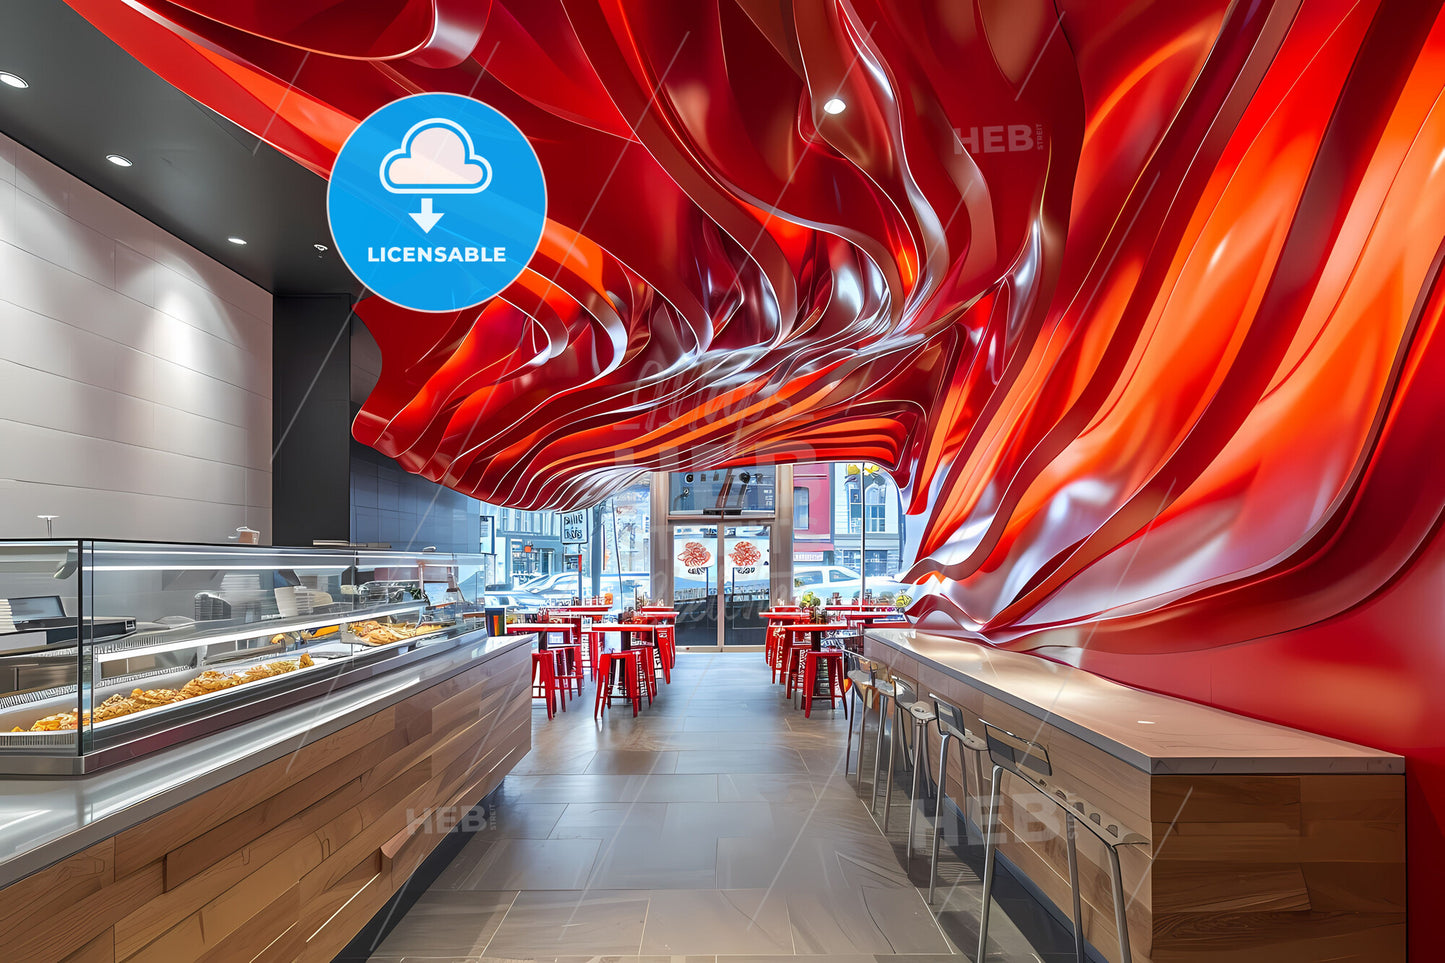 Modern Fast-Food Restaurant Interior with Vibrant Red and White Color Scheme Featuring Artistic Painting